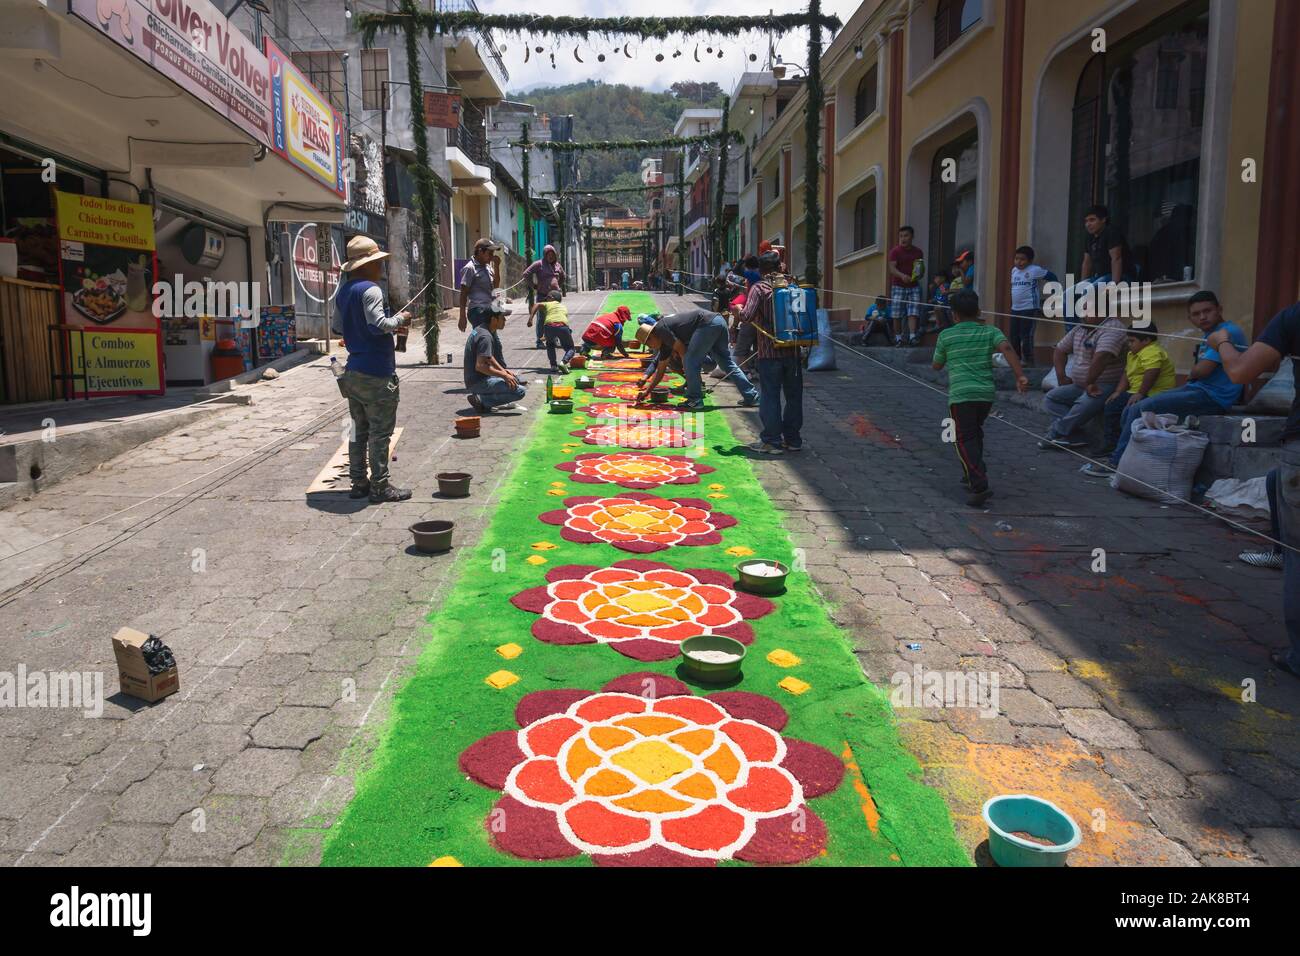 Santiago Atitlan, Guatemala - 30 March 2018: Local people making alfombra, colorful flower sawdust carpets for Semana Santa, Easter on the street Stock Photo